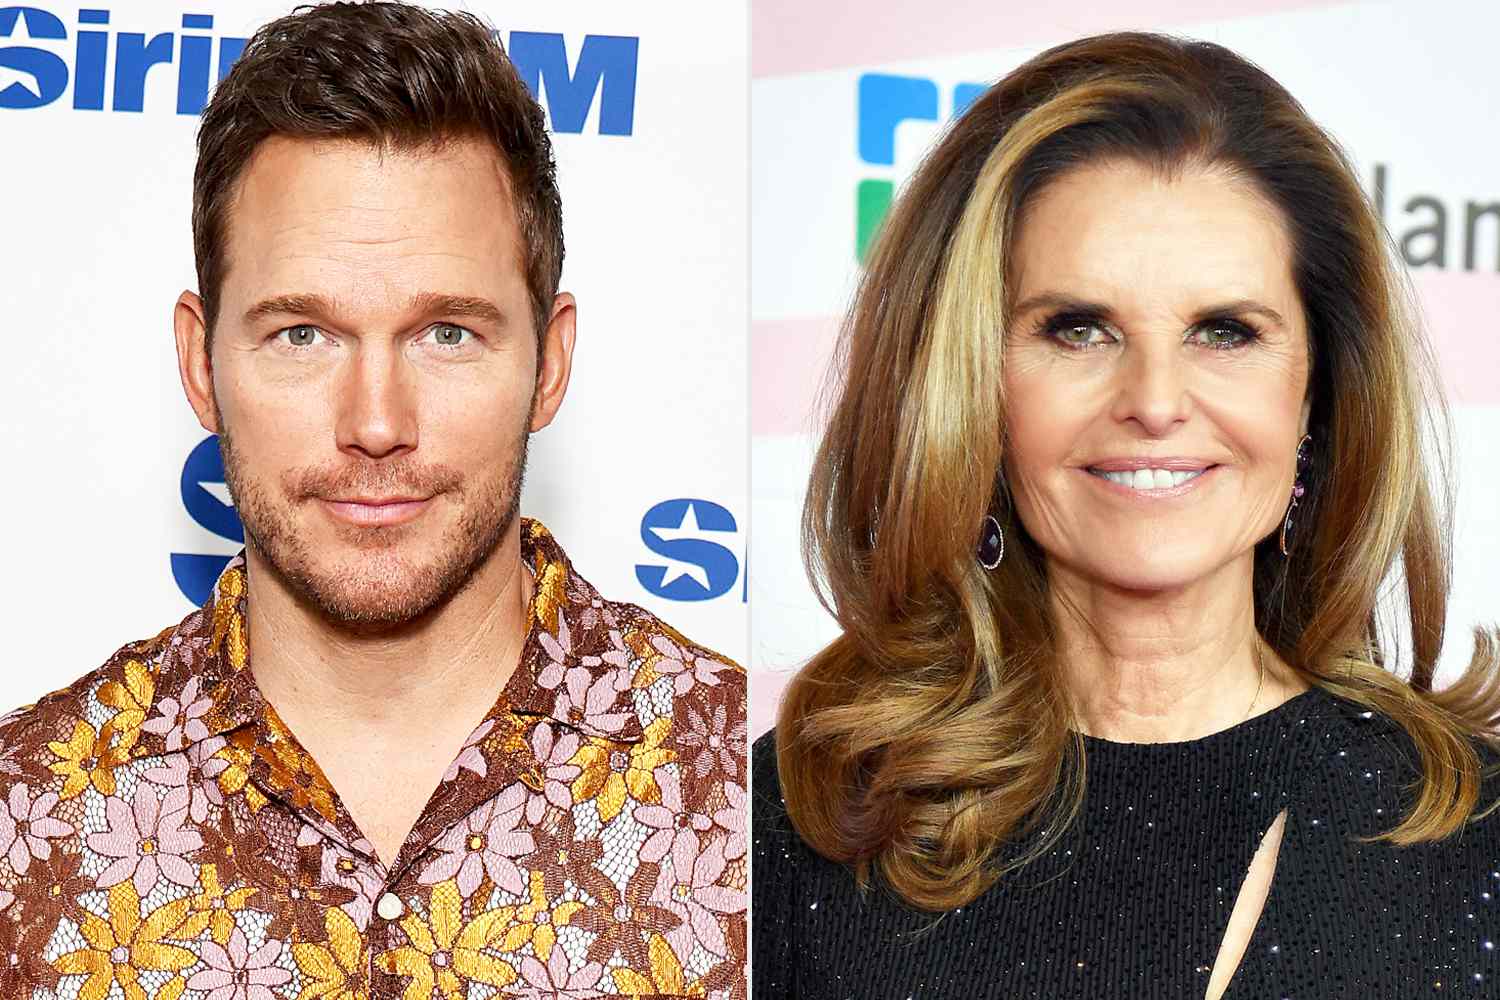 Chris Pratt Reveals the Parenting Advice He Wants from Mother-in-Law Maria Shriver: 'She's a Living Saint'